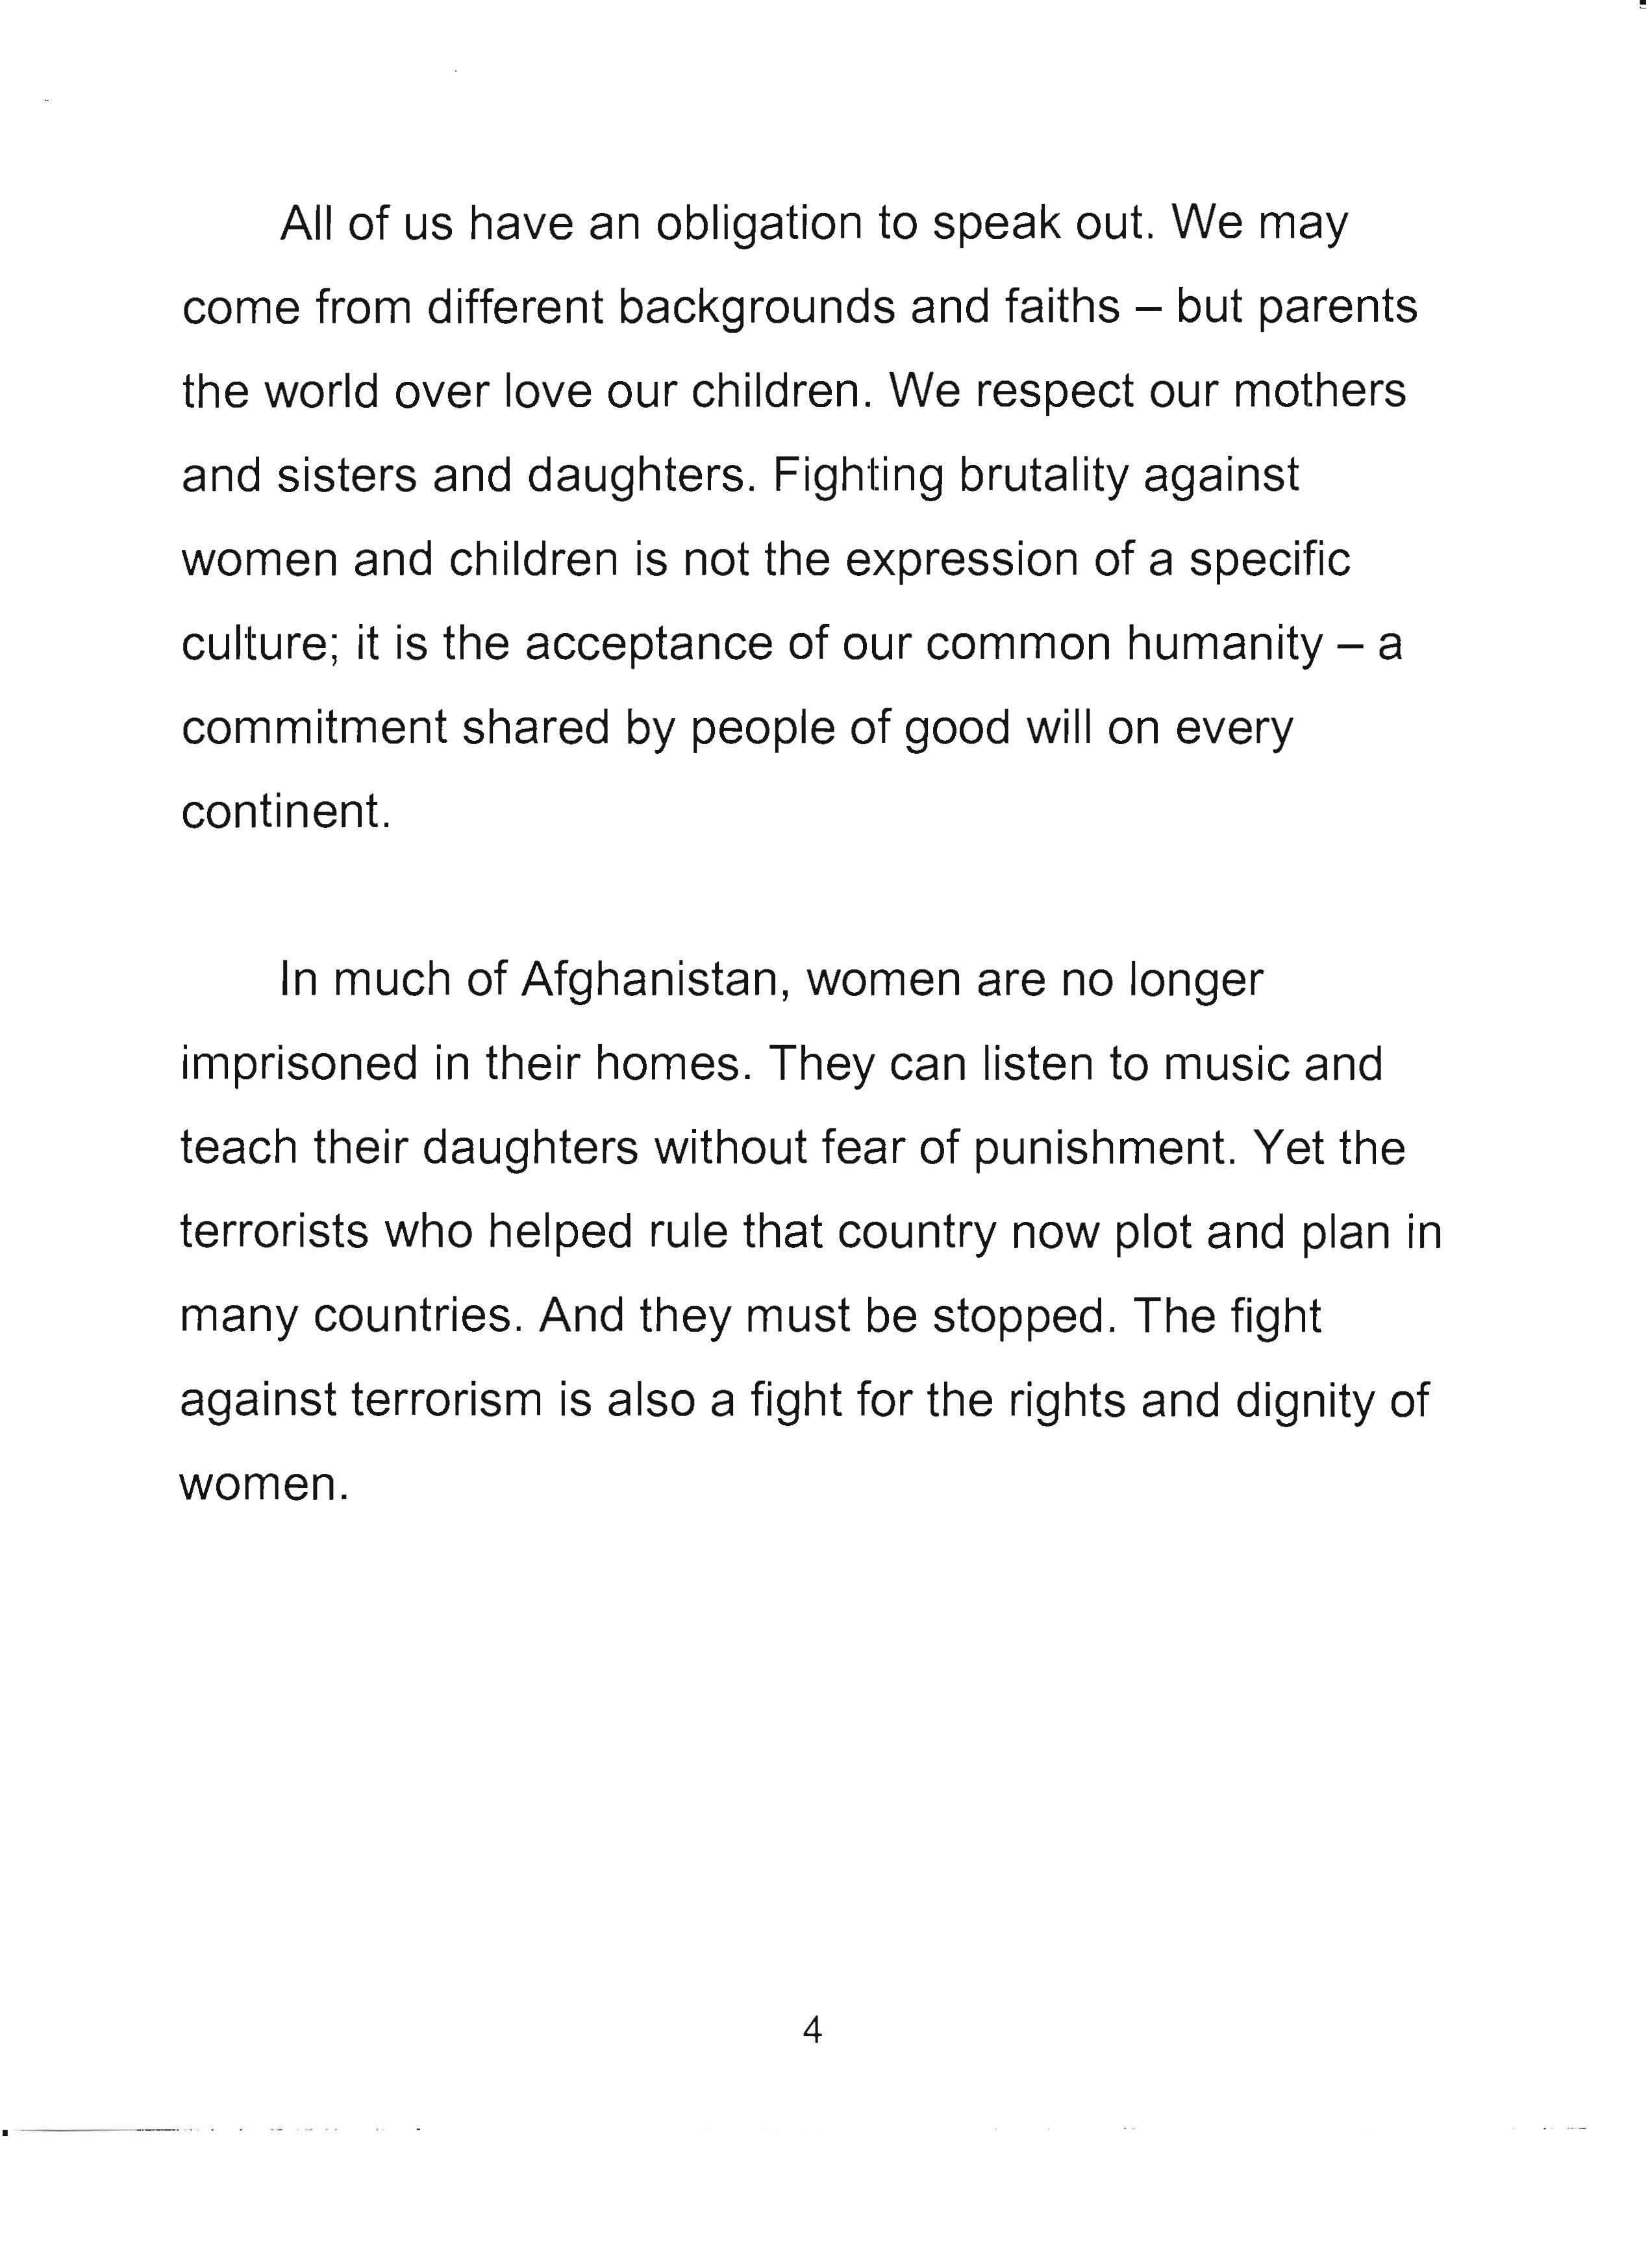 Statement used by First Lady Laura Bush to deliver a radio address on November 17, 2001 about the treatment of women and children by the Taliban in Afghanistan. (Page 4 of 5)